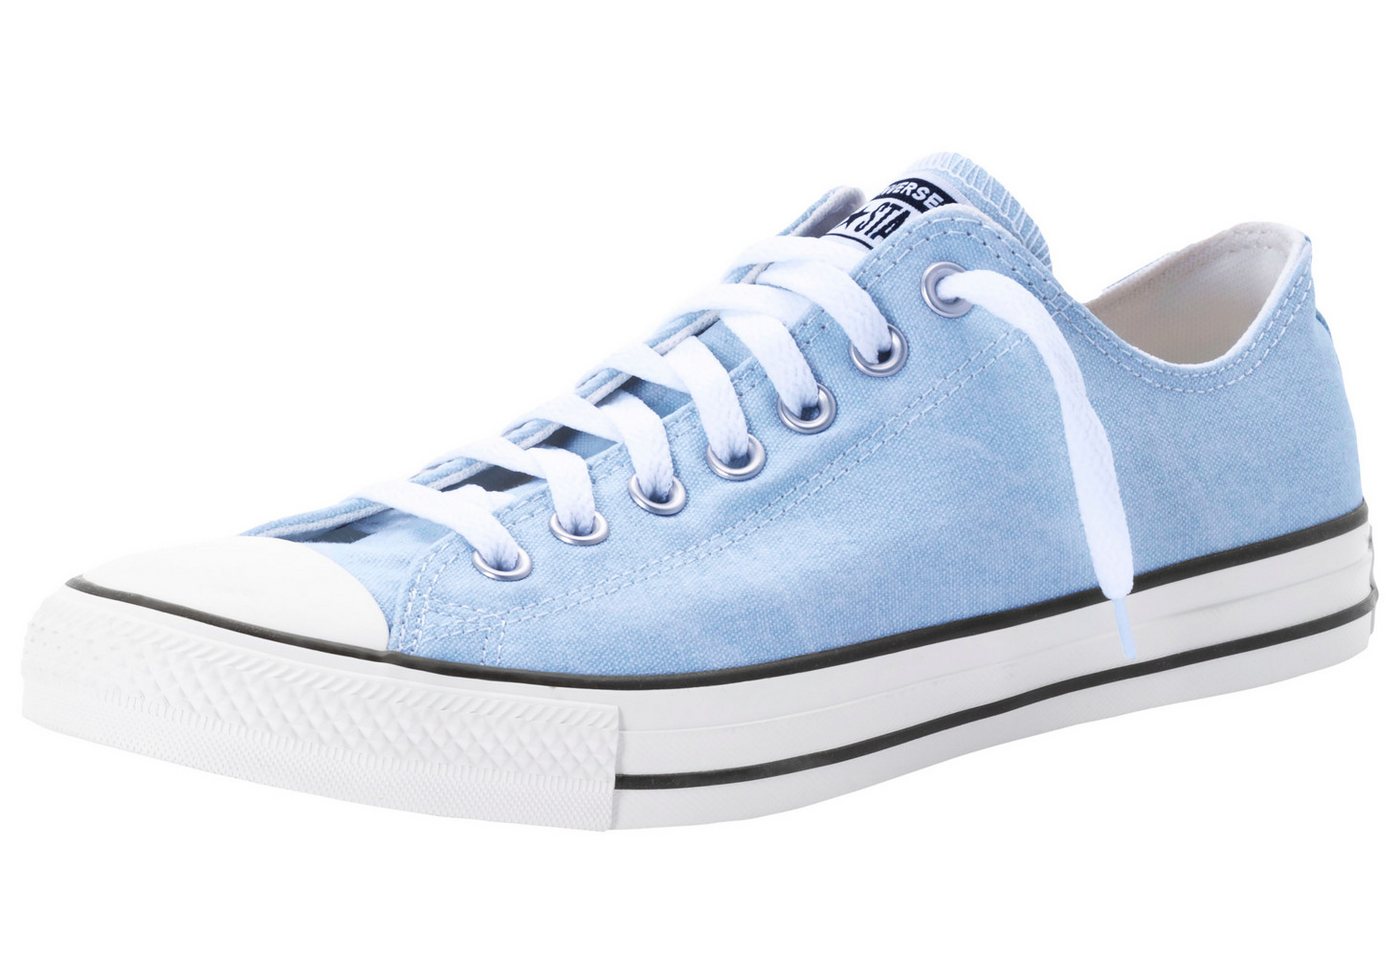 Converse CHUCK TAYLOR ALL STAR WASHED CANVAS Sneaker von Converse